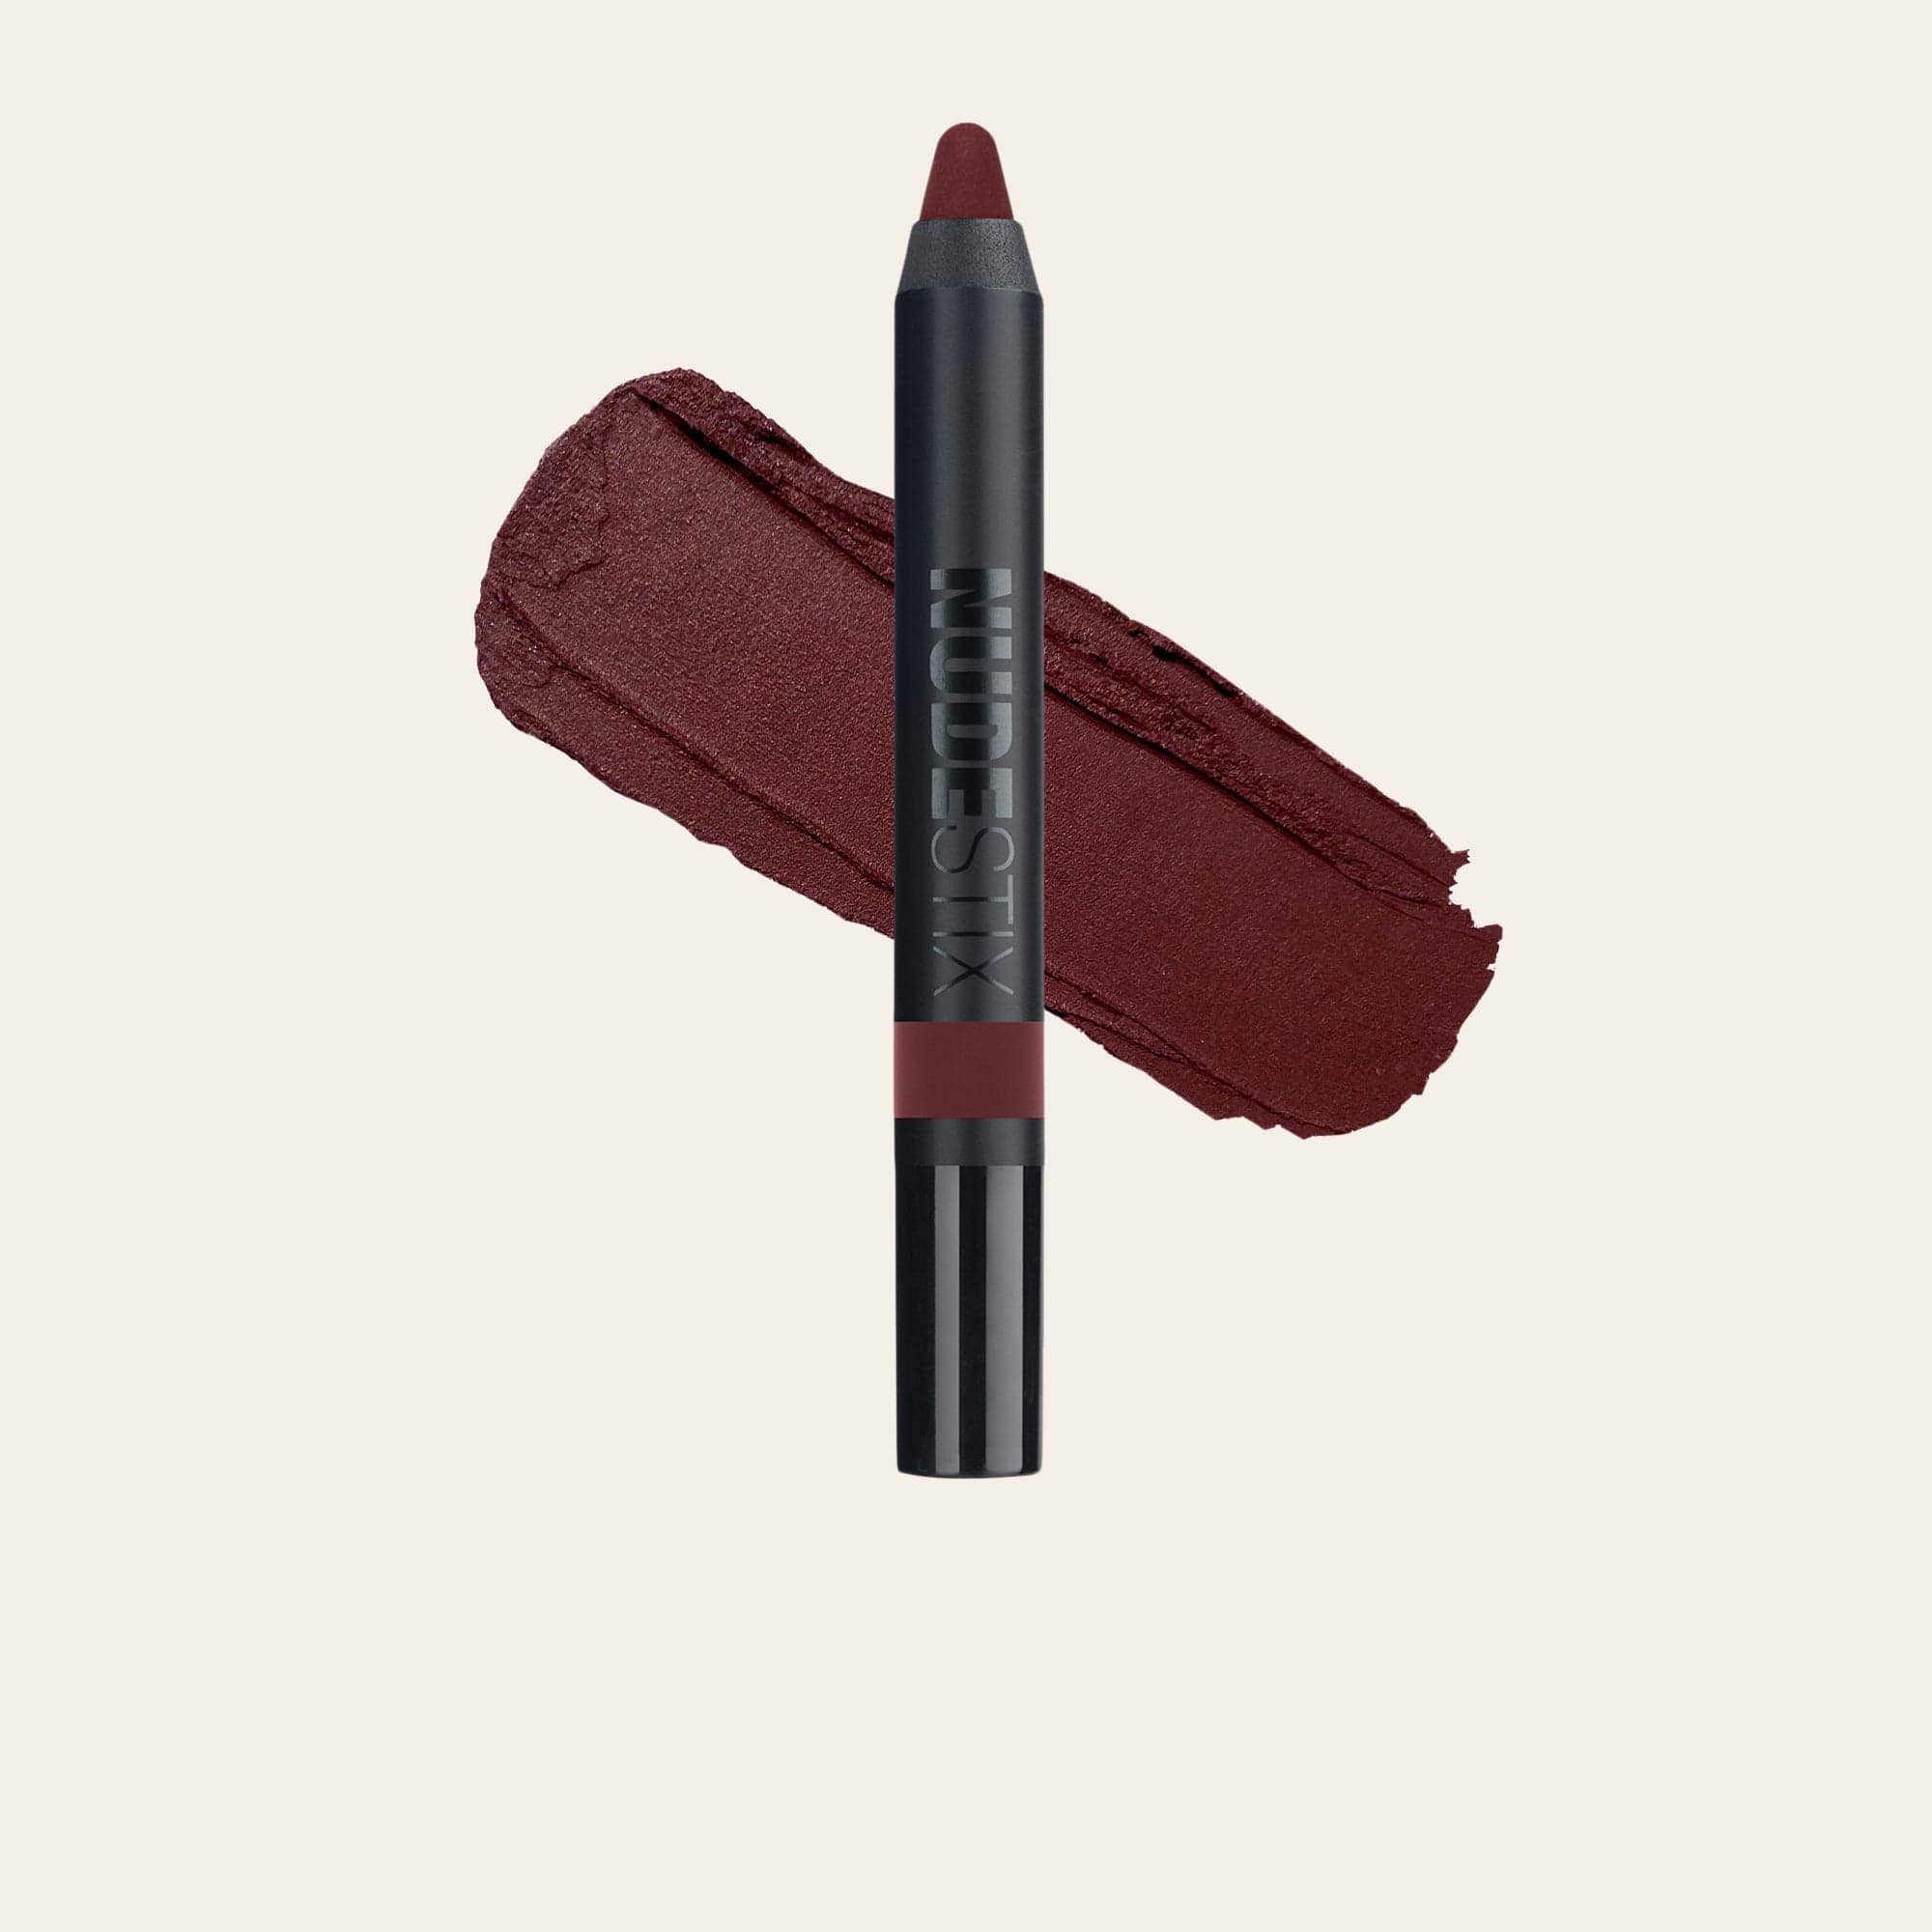 Magnetic Matte Eye Color Pencil in shade Oh! Bergine